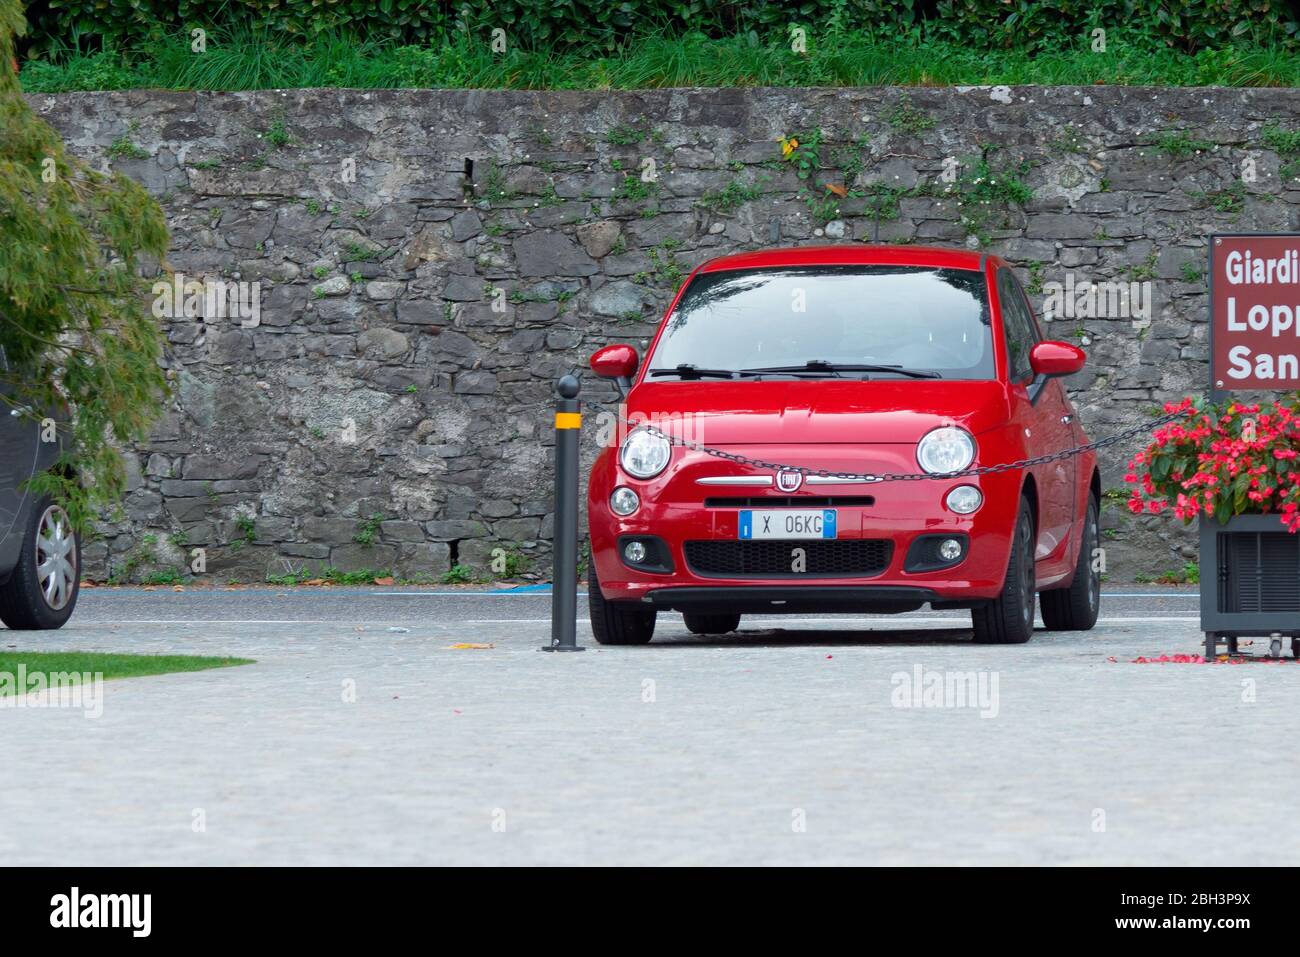 Lombardia, Italy - Sep. 30, 2019: Red Fiat 500, symbol of Italian cars. Fiat is a historical Italian car manufacturer. Stock Photo